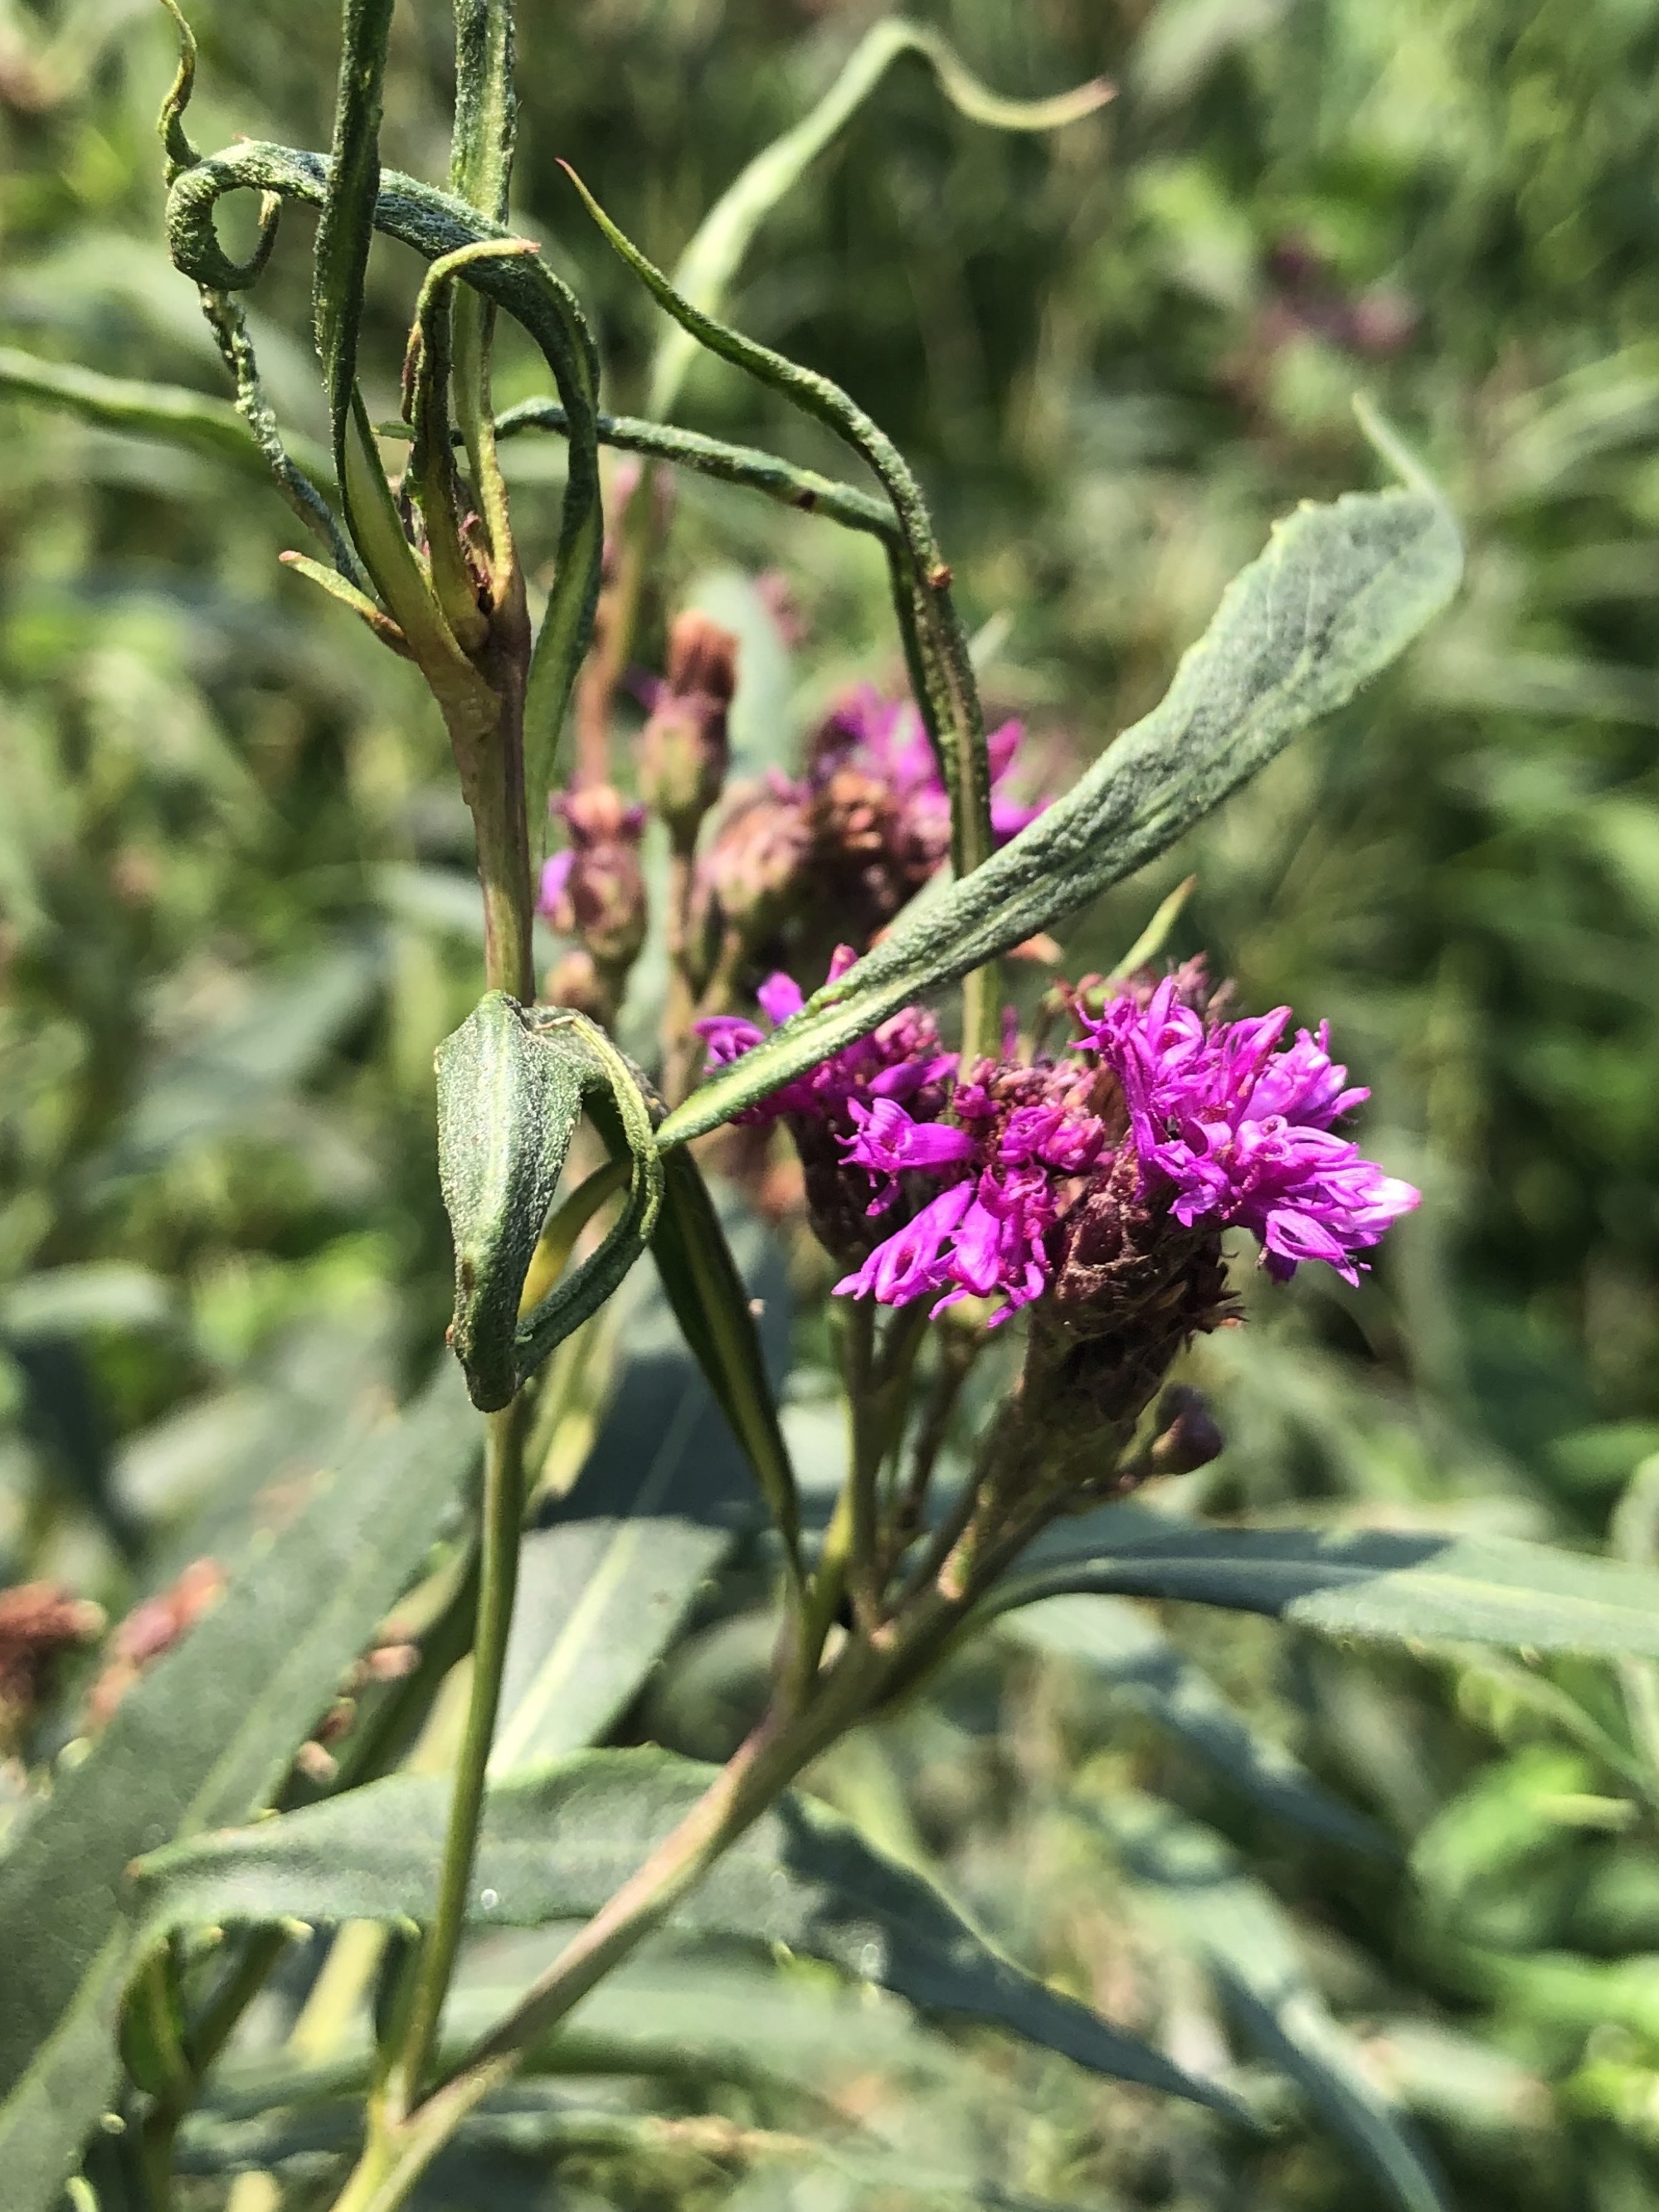 Tall Ironweed along bikepath behind Gregory Street in Madison, Wisconsin on August 3, 2021.